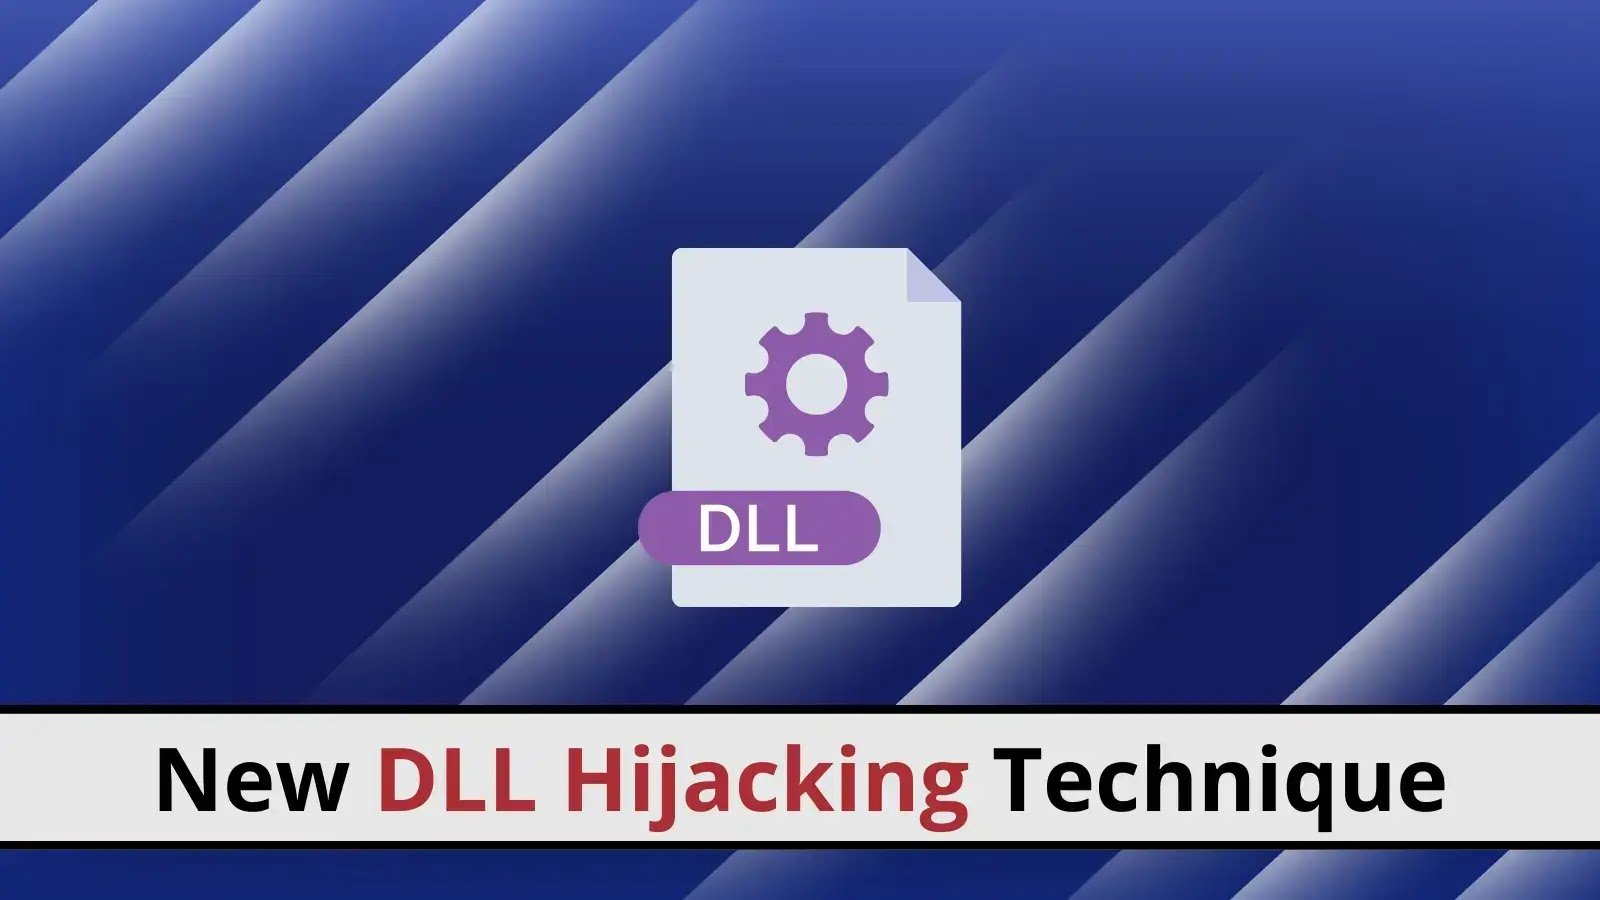 Attackers Can Bypass Windows Security Using New DLL Hijacking Technique